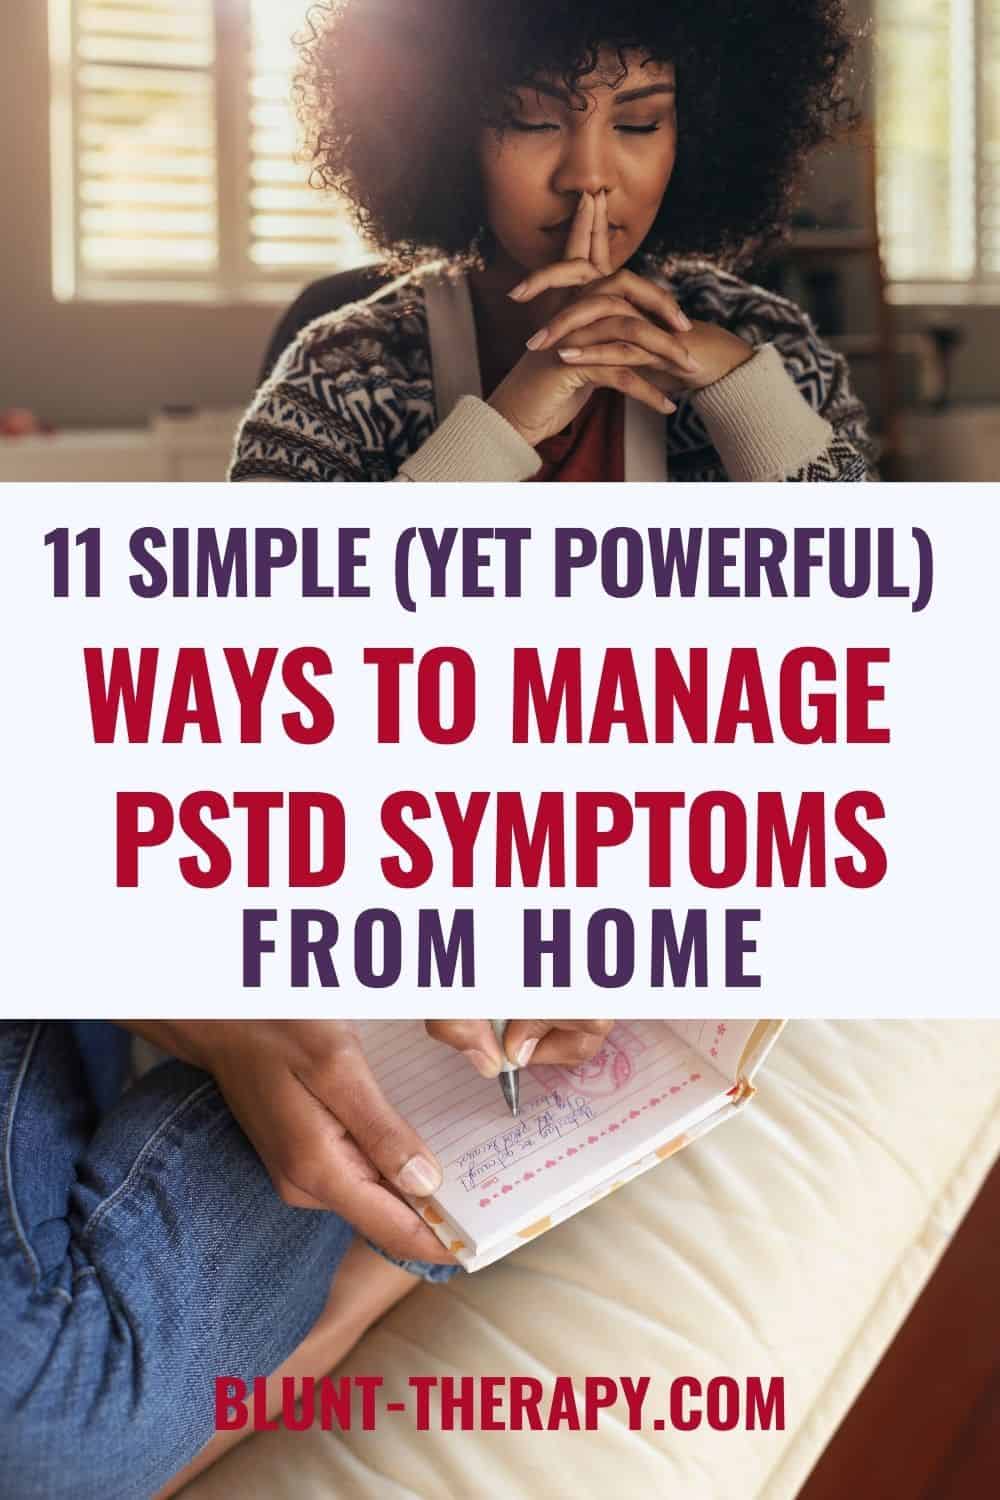 11 Easy (Yet Powerful) Ways To Manage PTSD Symptoms At Home